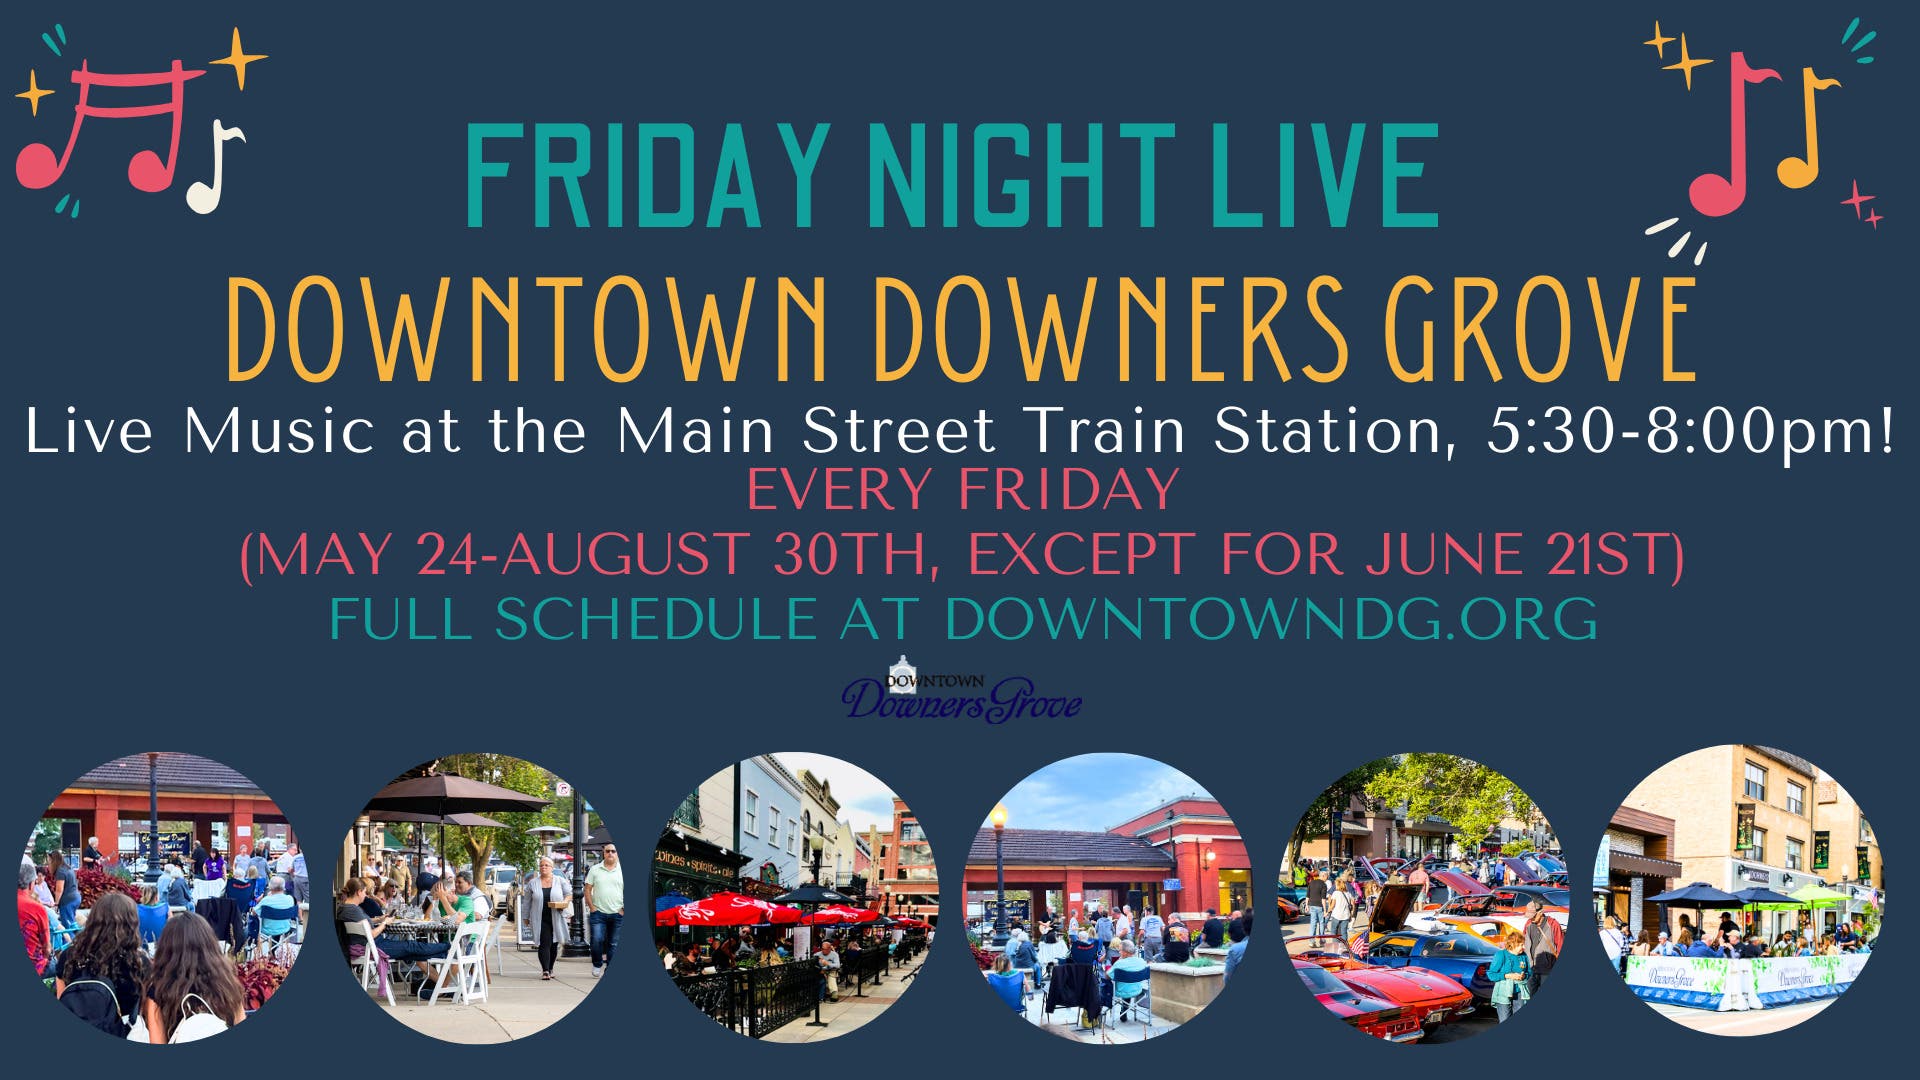 Friday Night Live Downtown Downers Grove